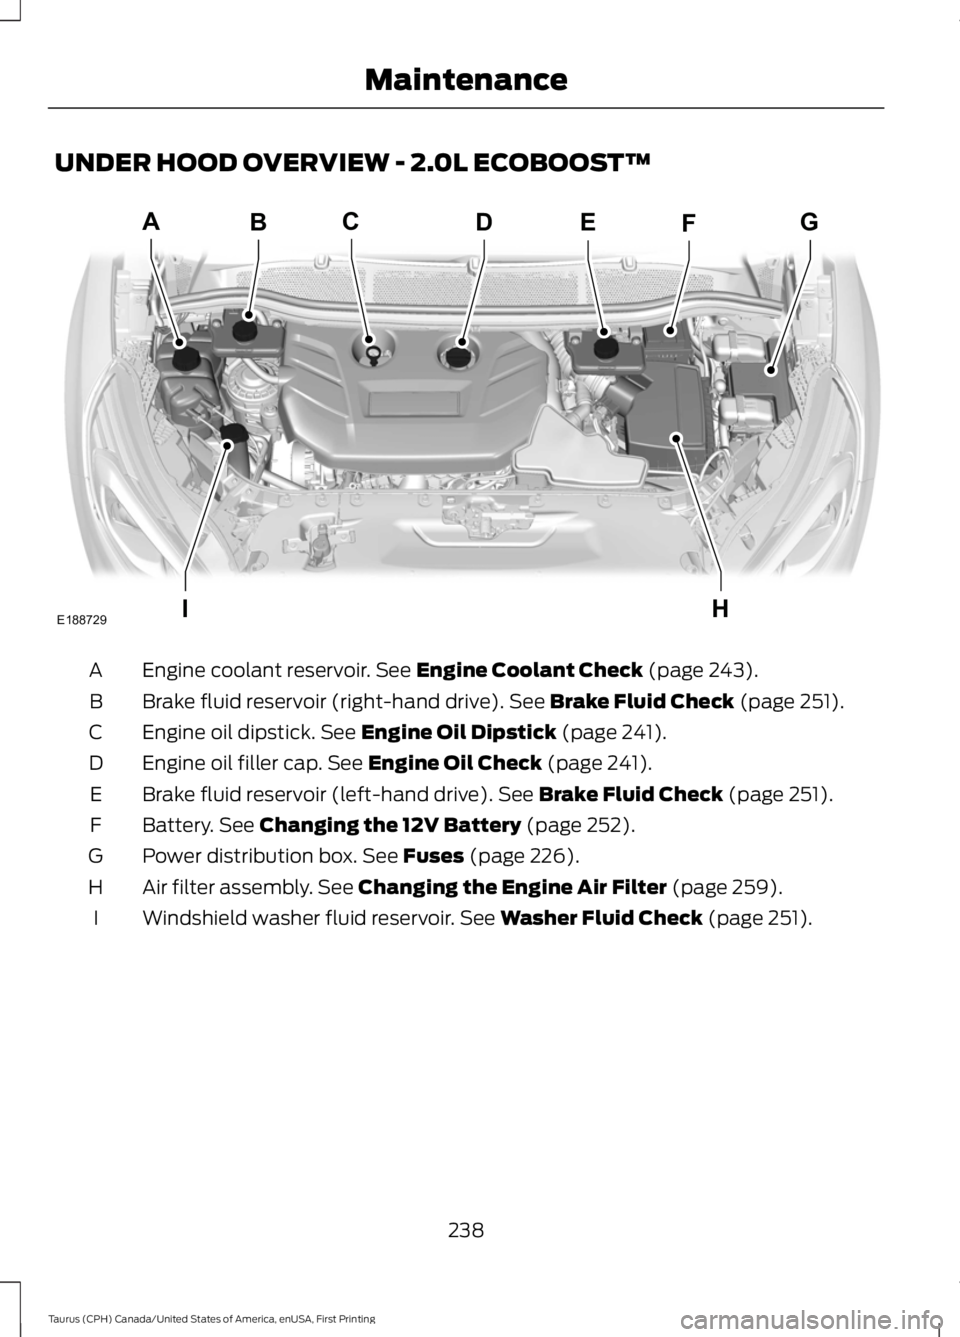 FORD TAURUS 2017  Owners Manual UNDER HOOD OVERVIEW - 2.0L ECOBOOST™
Engine coolant reservoir. See Engine Coolant Check (page 243).A
Brake fluid reservoir (right-hand drive). See Brake Fluid Check (page 251).B
Engine oil dipstick.